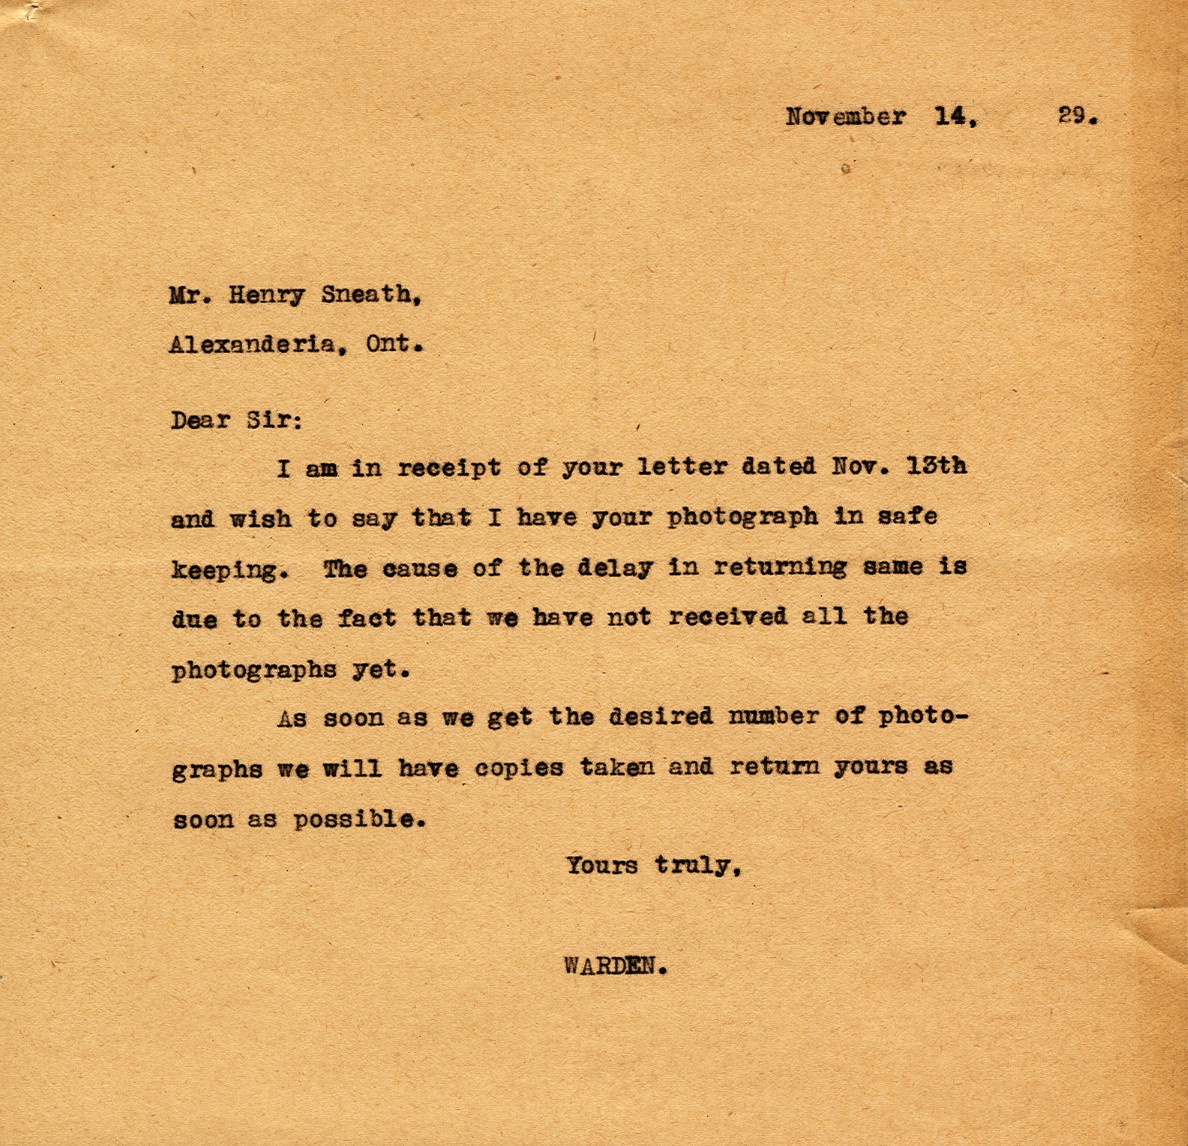 Letter from the Warden to Mr. Henry Sneath, 14th November 1929